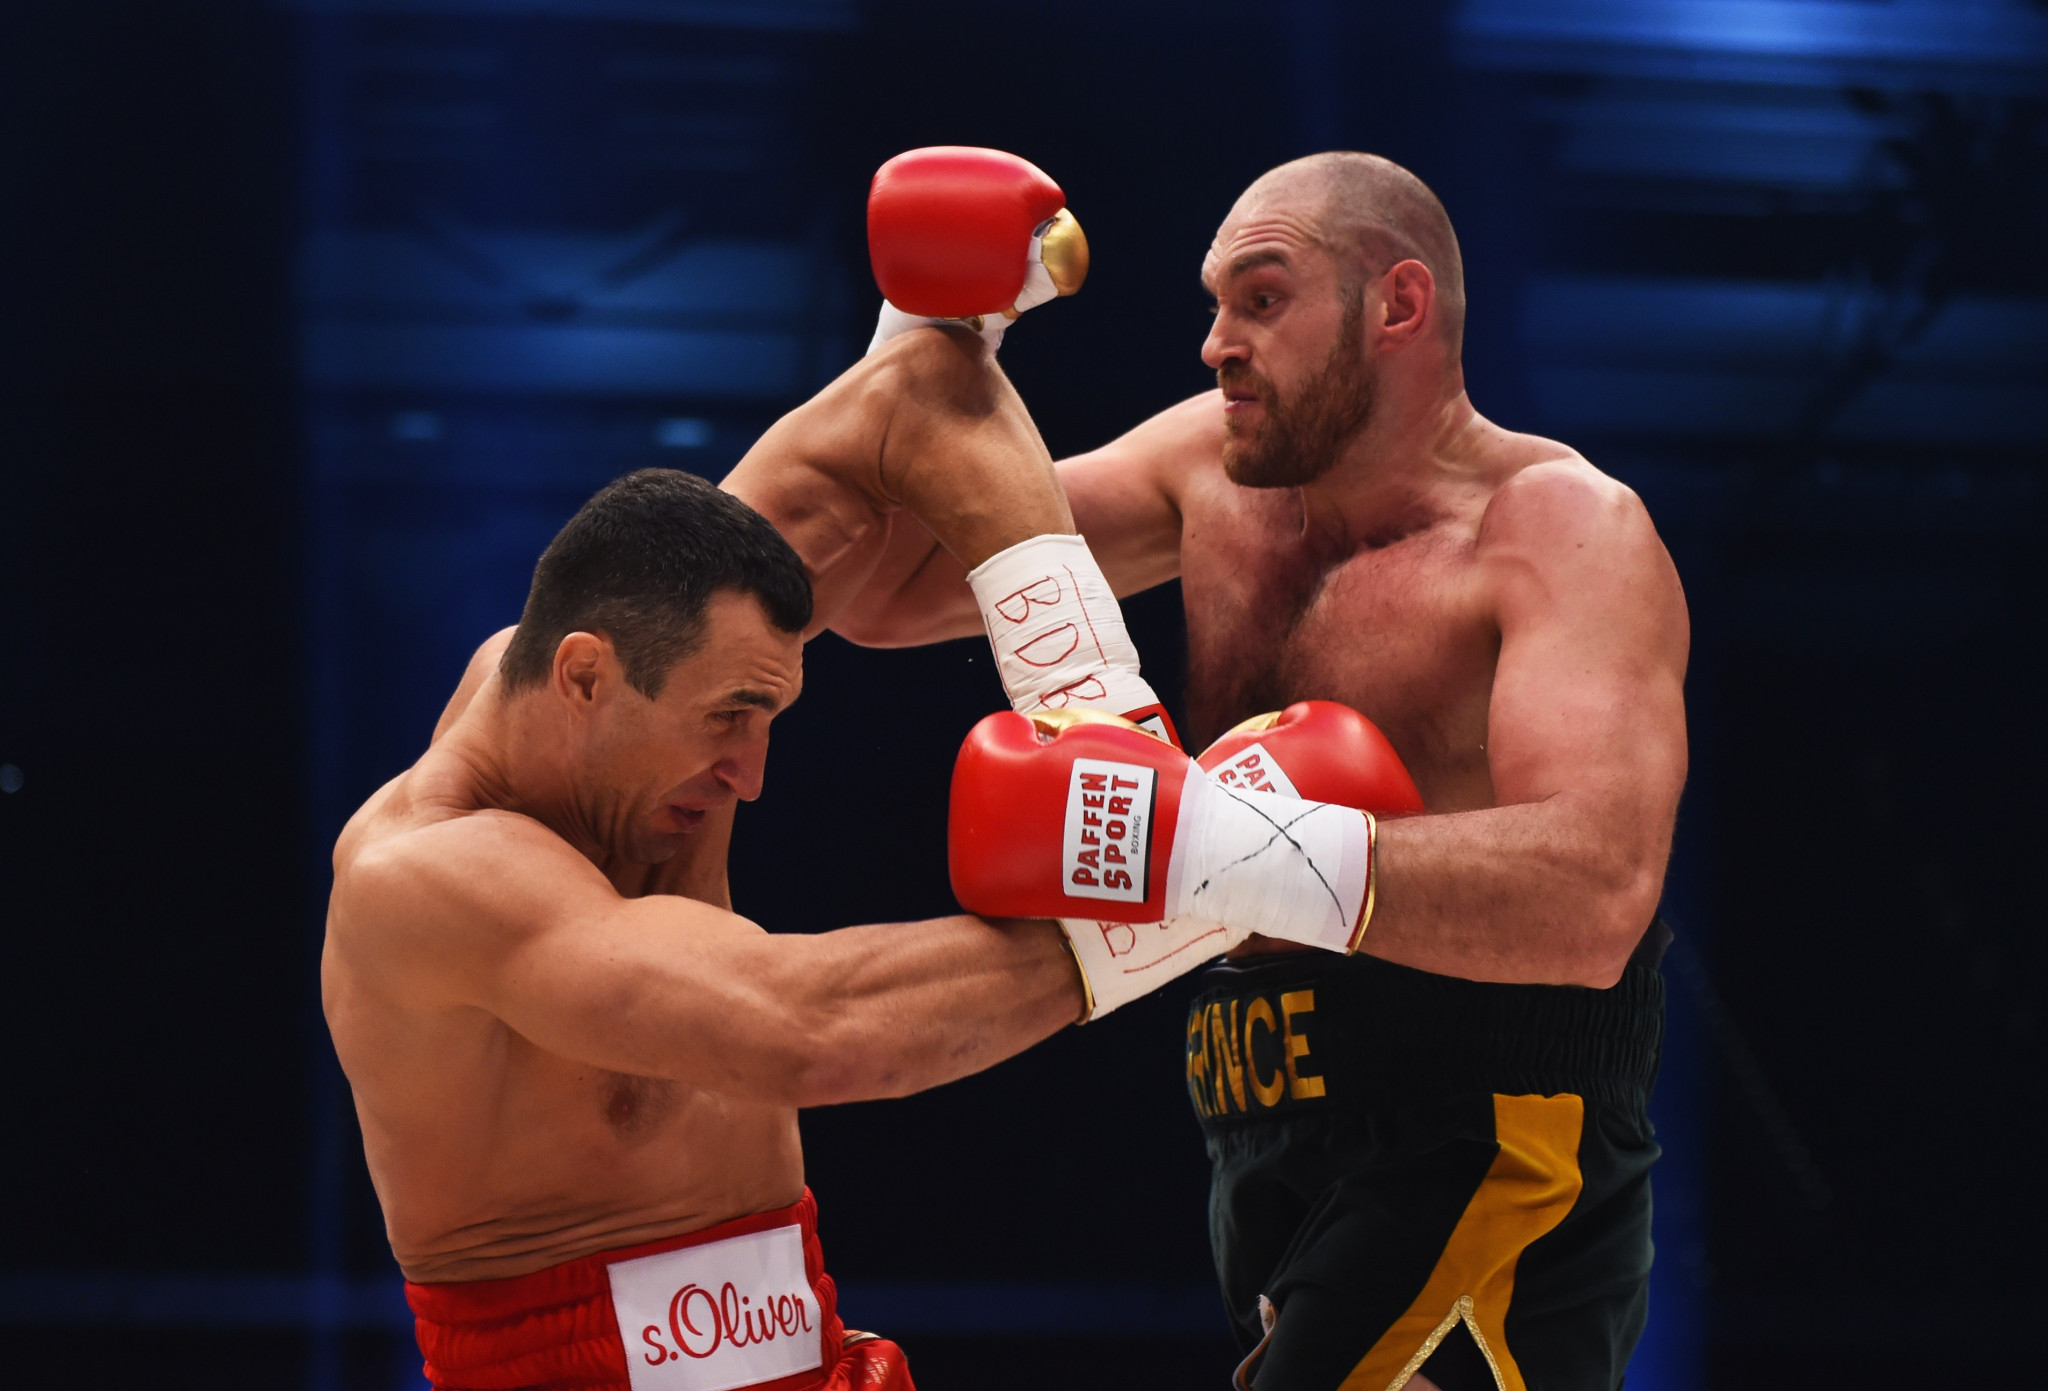 Tyson Fury has been inactive since beating Wladimir Klitschko in Germany in November 2015 ©Getty Images